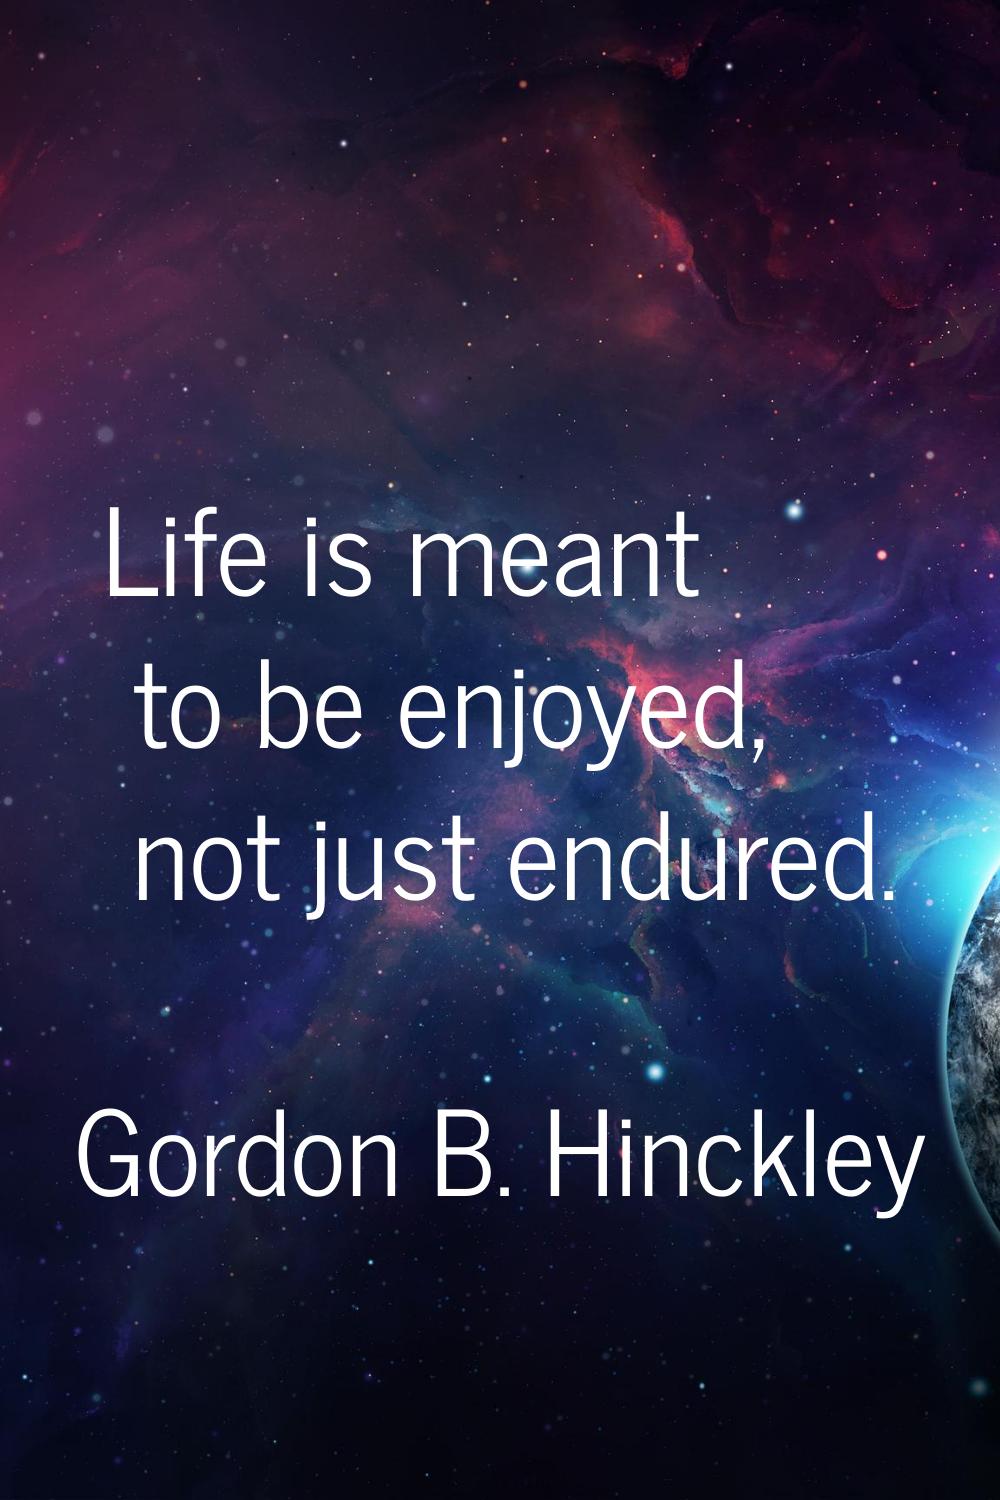 Life is meant to be enjoyed, not just endured.